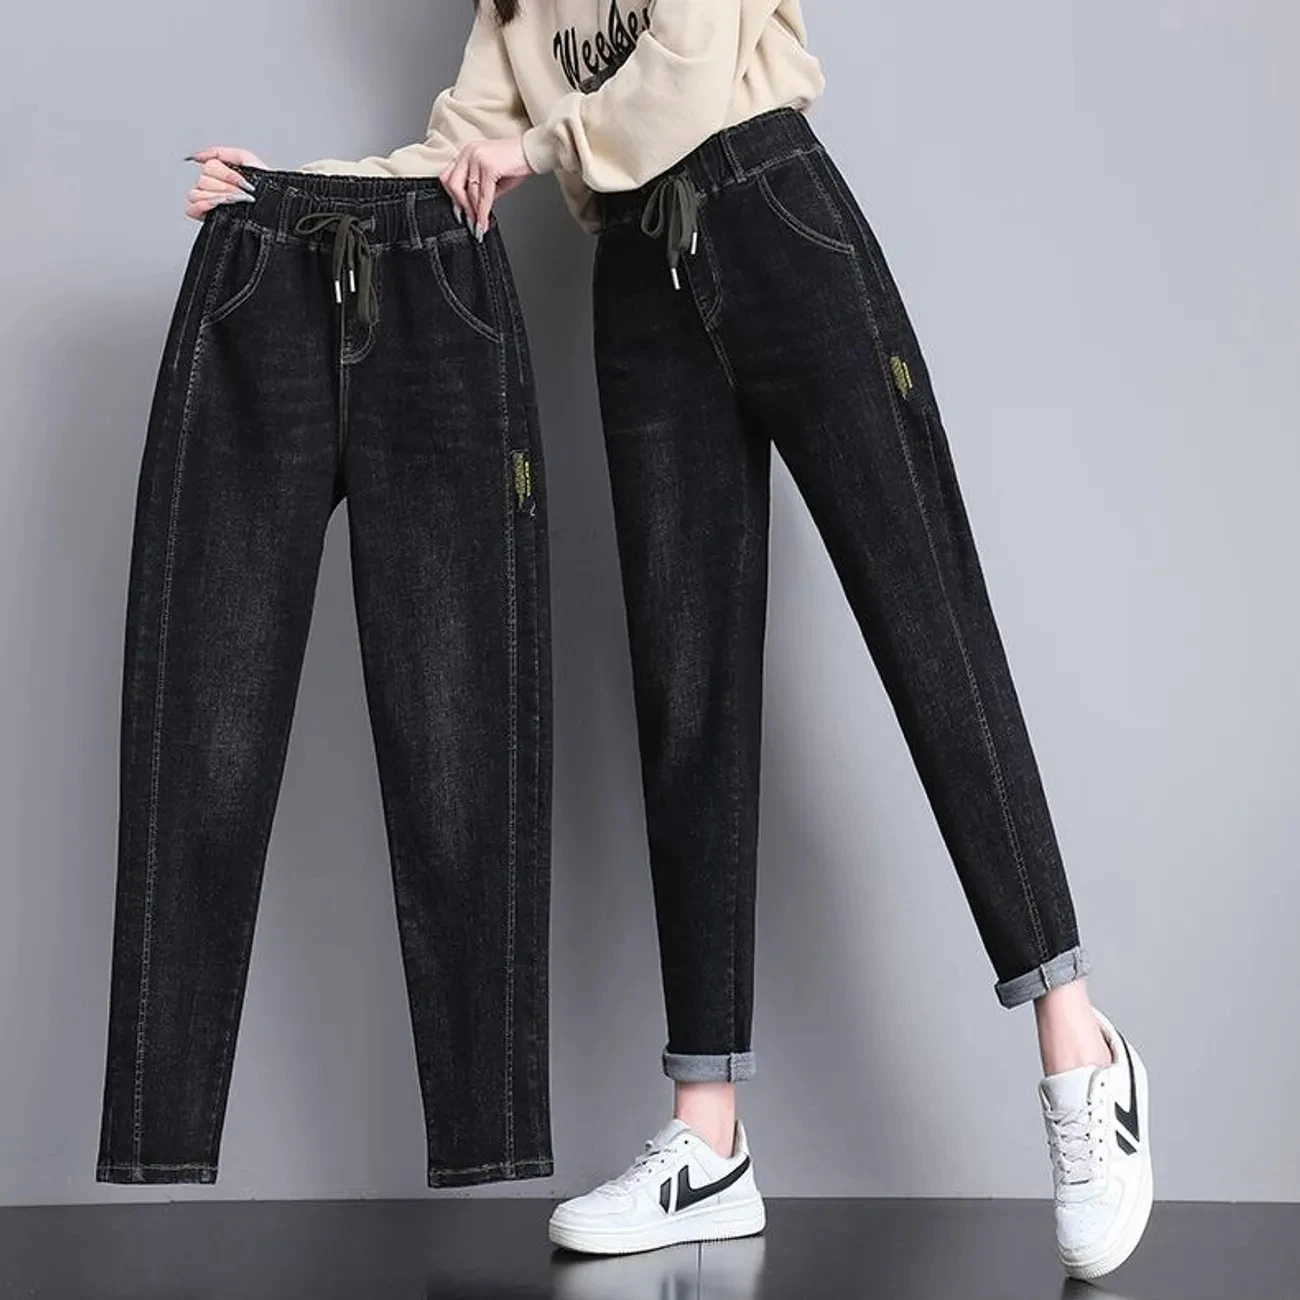 

Spring Summe Large Size Mom Jeans Woman Elastic High Waist Baggy Jeans for Womens Denim Ripped Jeans Female Loose Harem Pants